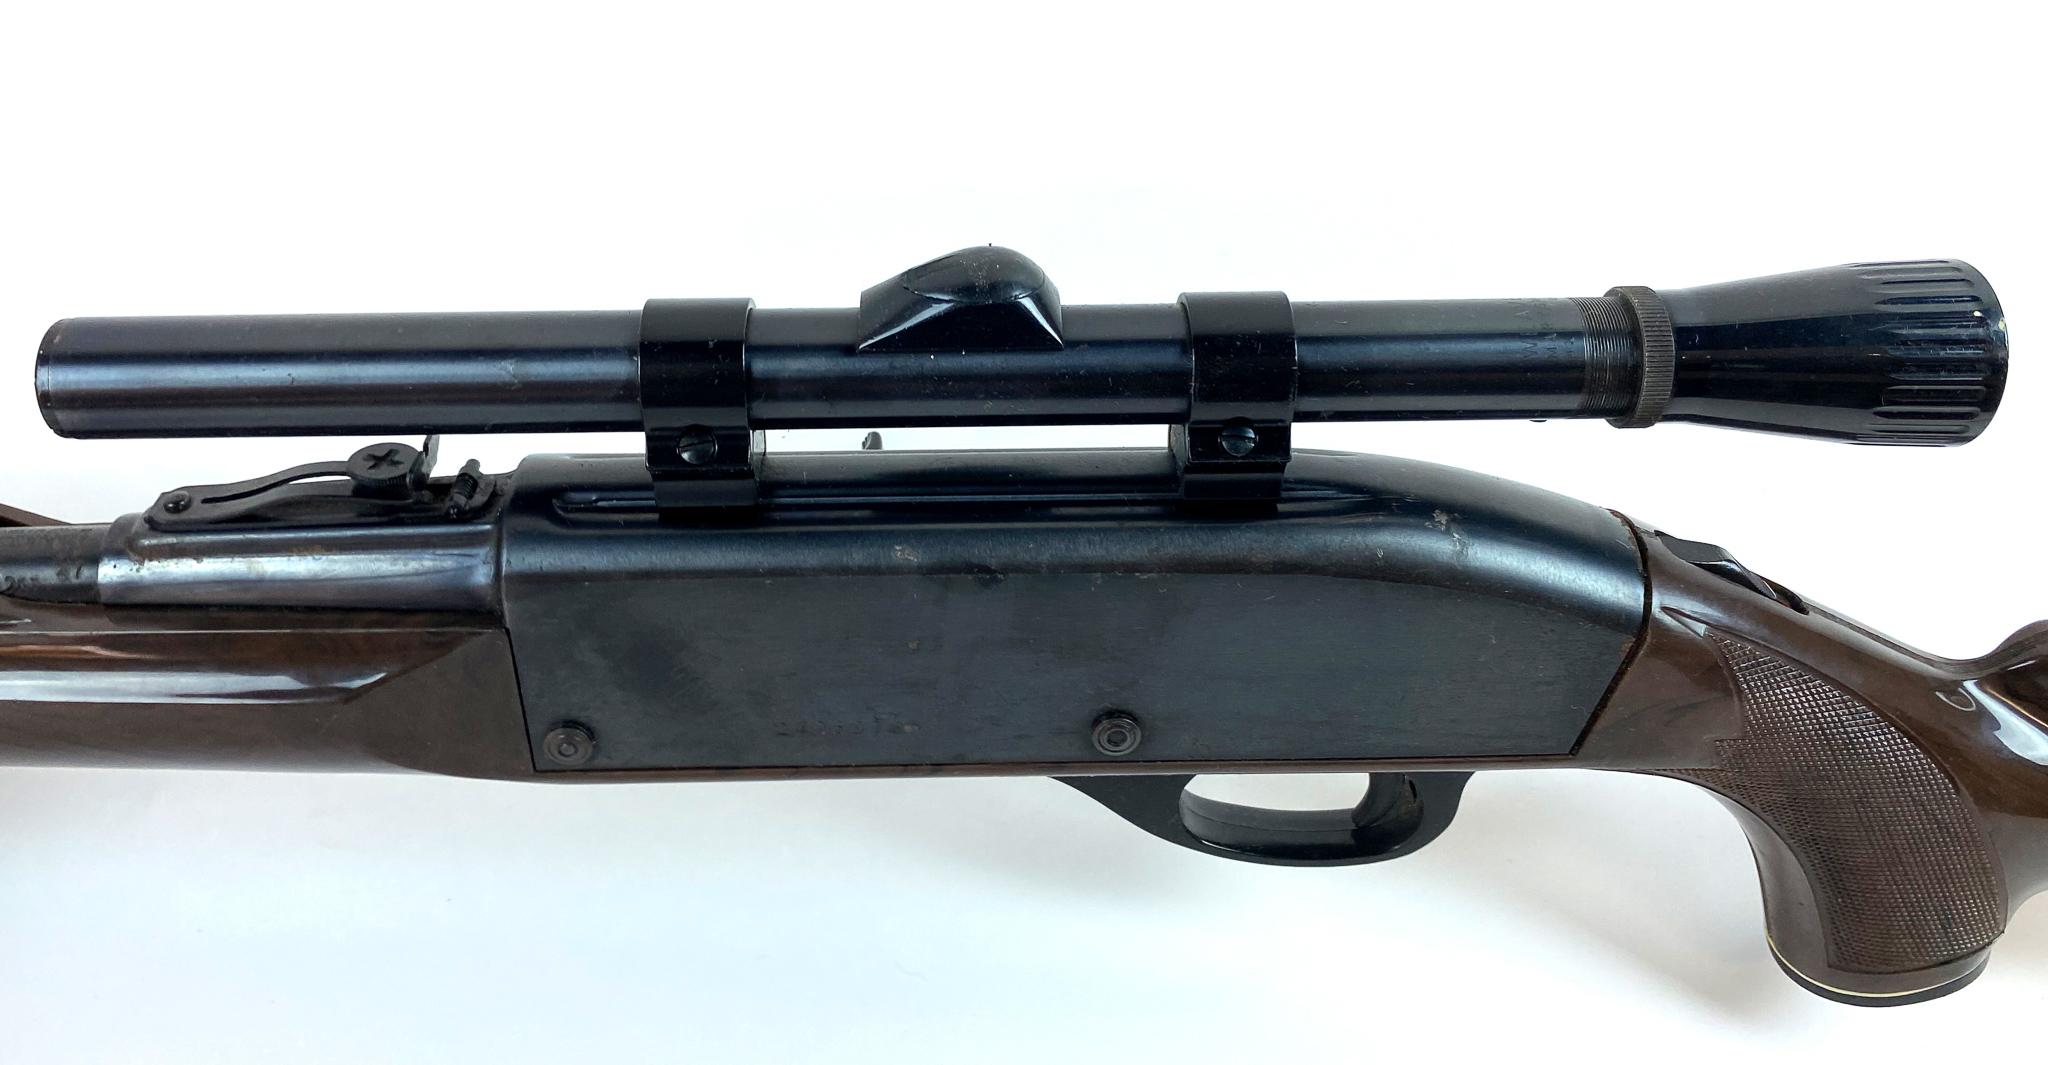 Remington Firearms Nylon 66 Rifle in .22 CAL LR Only Serial # 2406978 with Weaver Scope